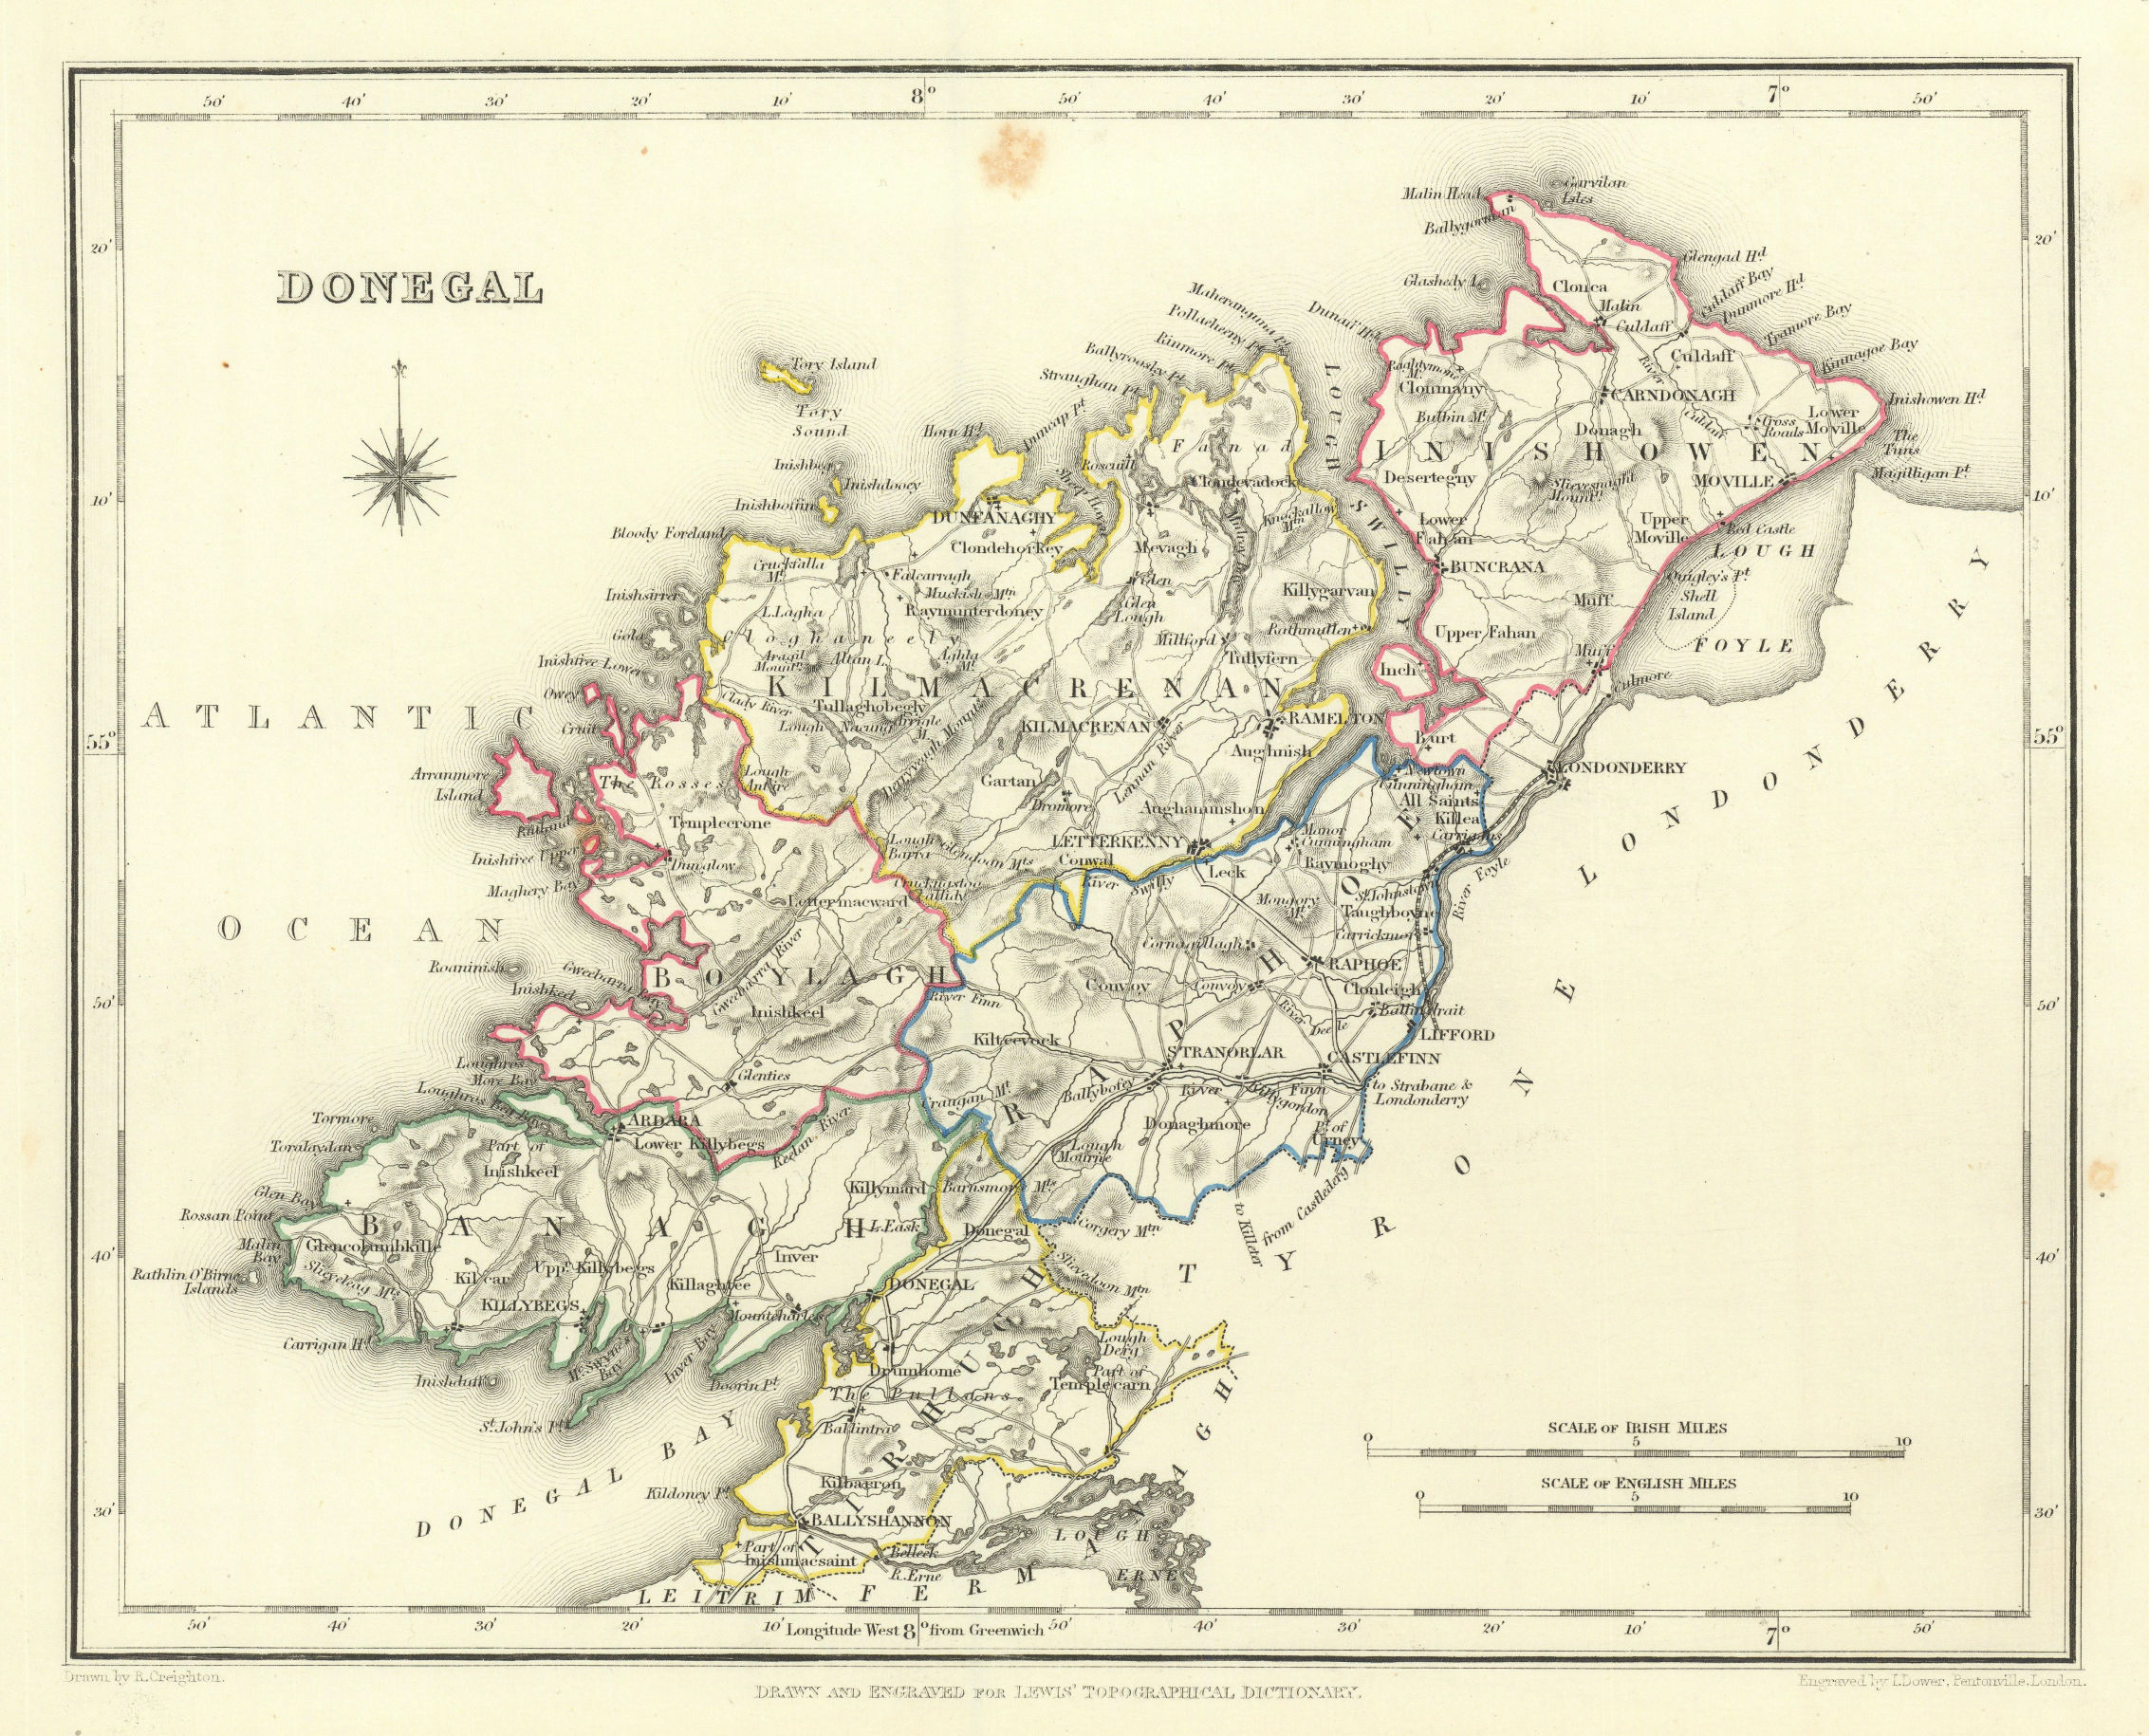 COUNTY DONEGAL antique map for LEWIS by DOWER & CREIGHTON. Ireland 1846